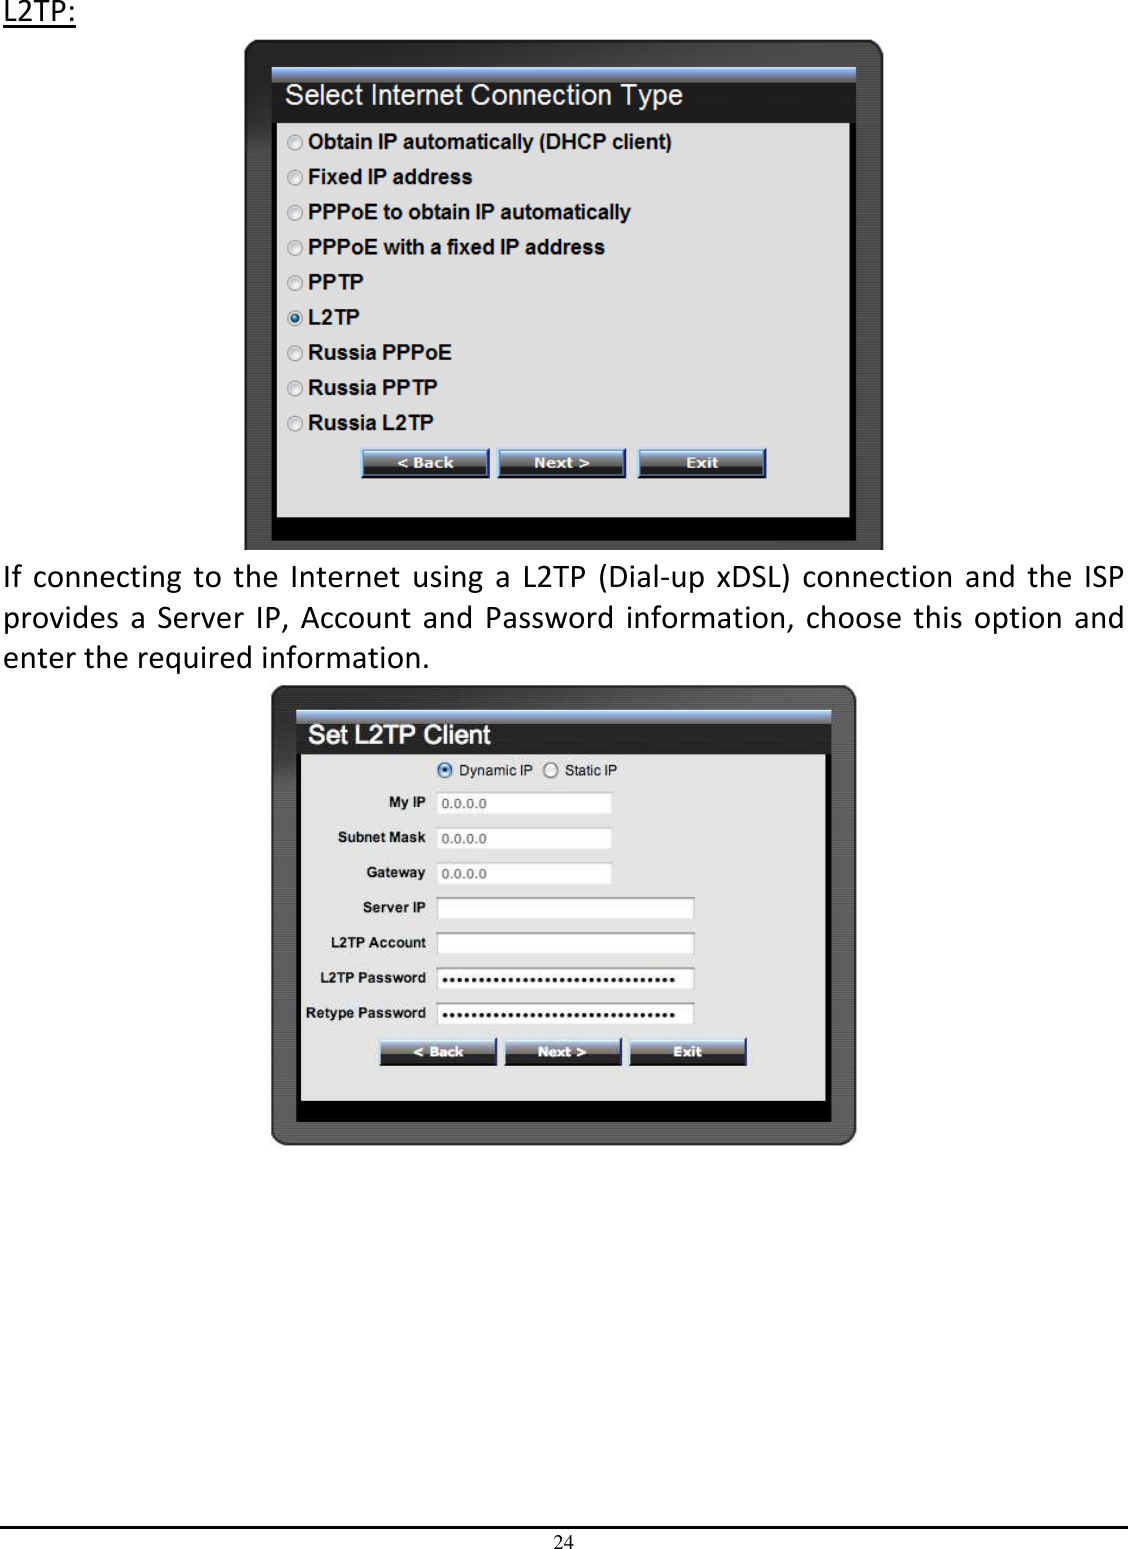 24 L2TP:  If connecting to the Internet using a L2TP (Dial-up xDSL) connection and the ISP provides a Server IP, Account and Password information, choose this option and enter the required information.  